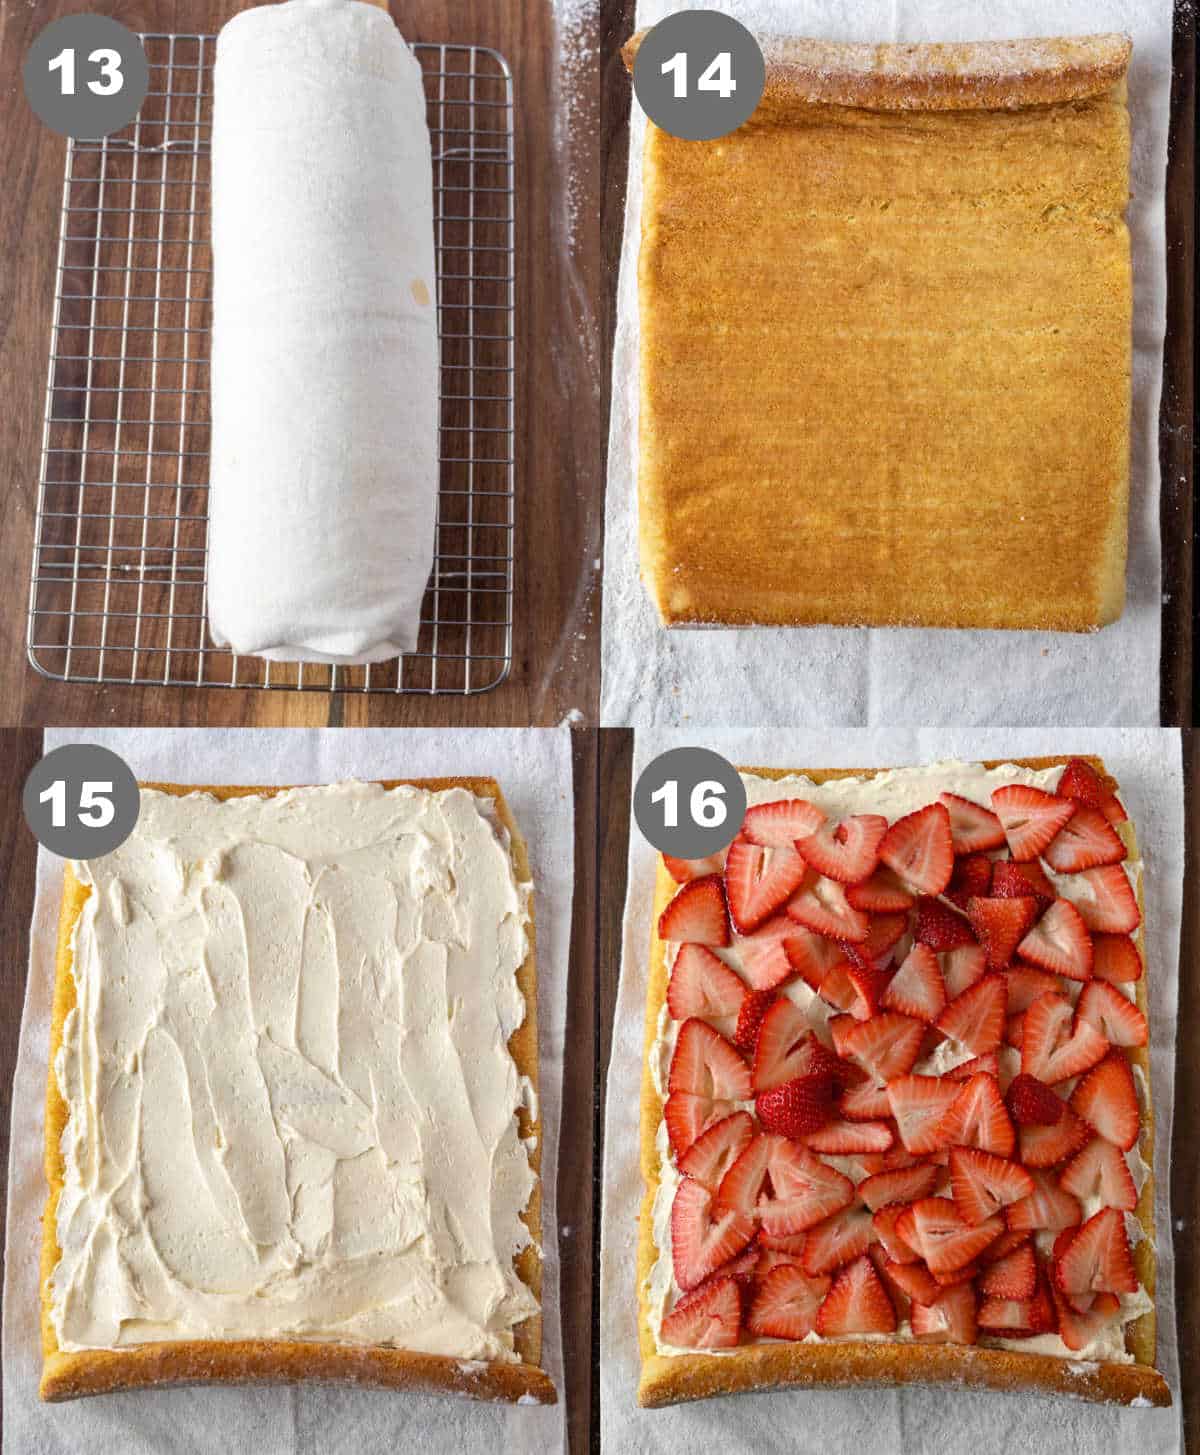 The cake unrolled and the filling spread onto it with a layer of strawberries.